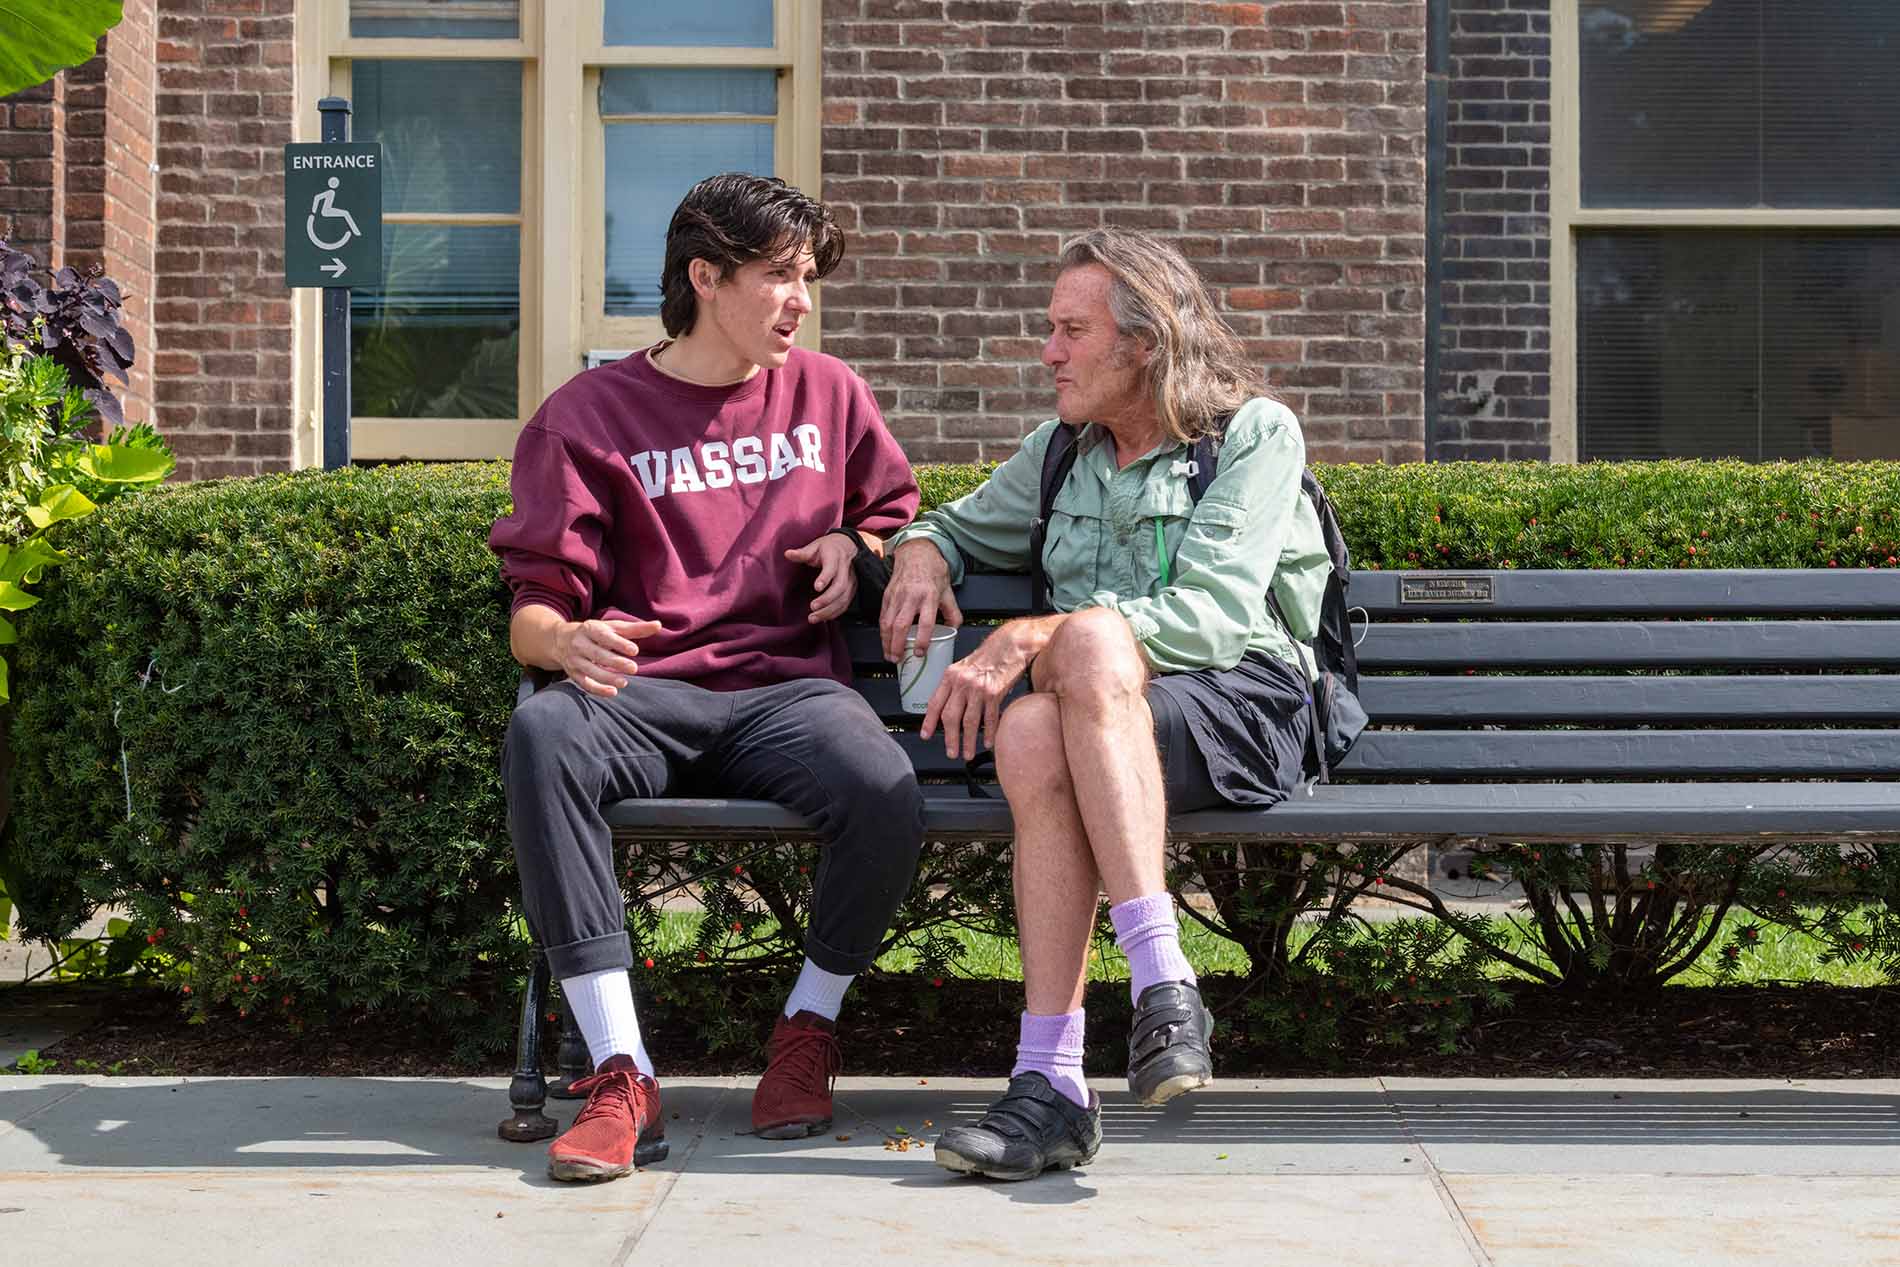 Two people, probably a child and a parent, sit on a bench outside. The child, on the left, has shortish, shoulder-length brown hair and a burgundy sweater with “Vassar” on it. The parent, on the right, has long graying hair, stubble, and a green shirt. There is a hedge behind the bench, and a brick building right behind the hedge.